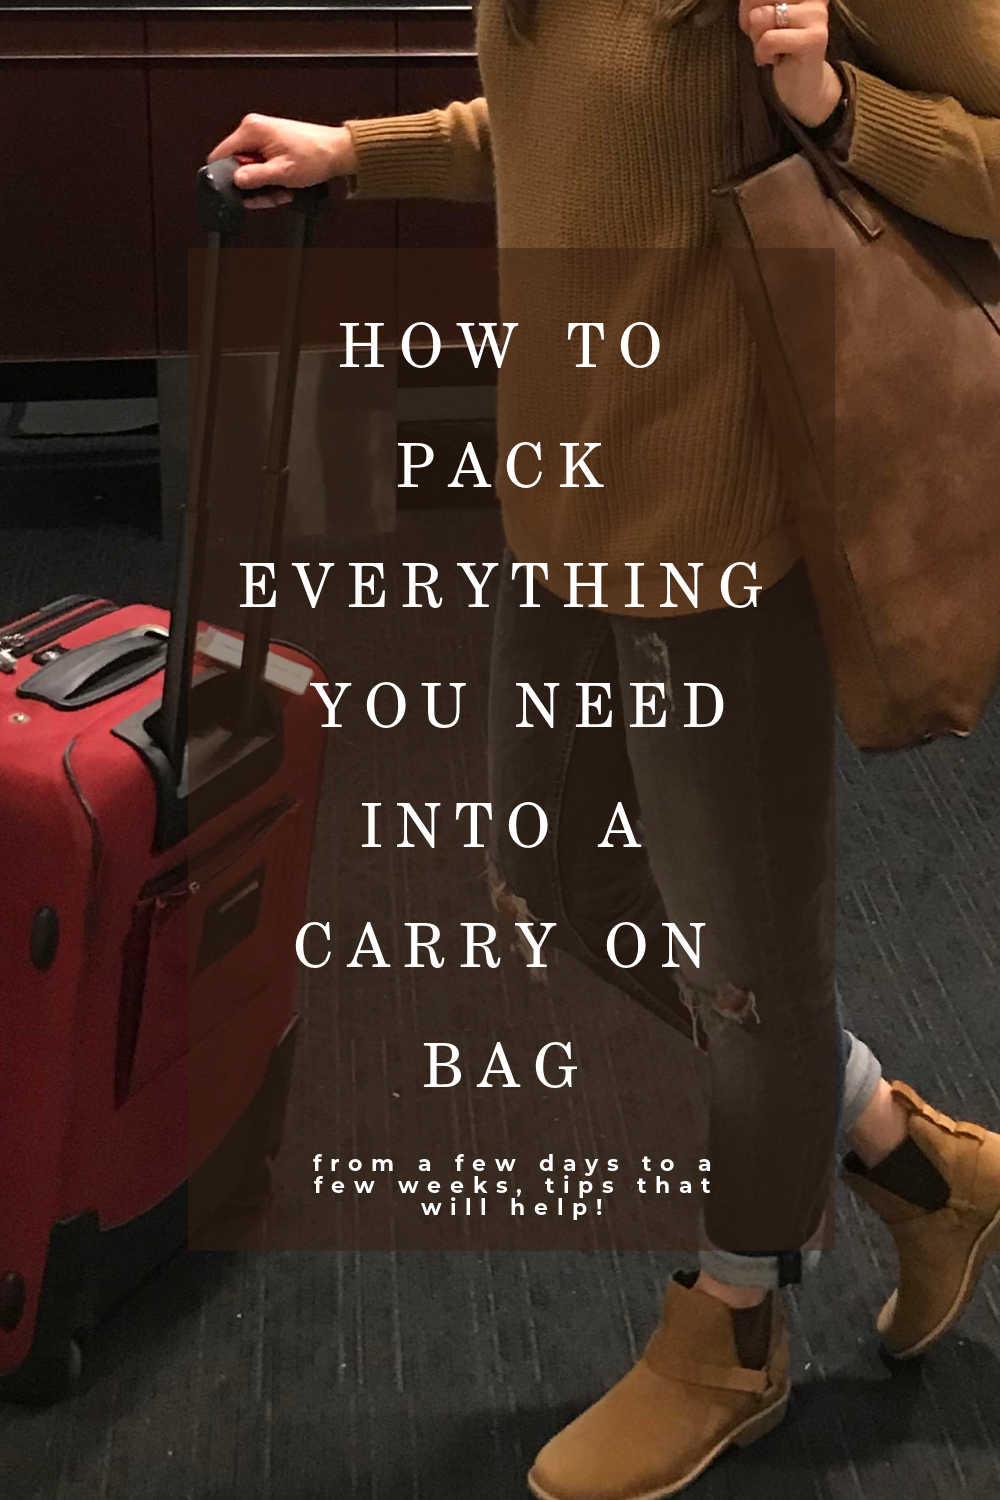 Back to basics with not so basic bags! #whatbagareyoucarrying #bagsint, Carry Bags